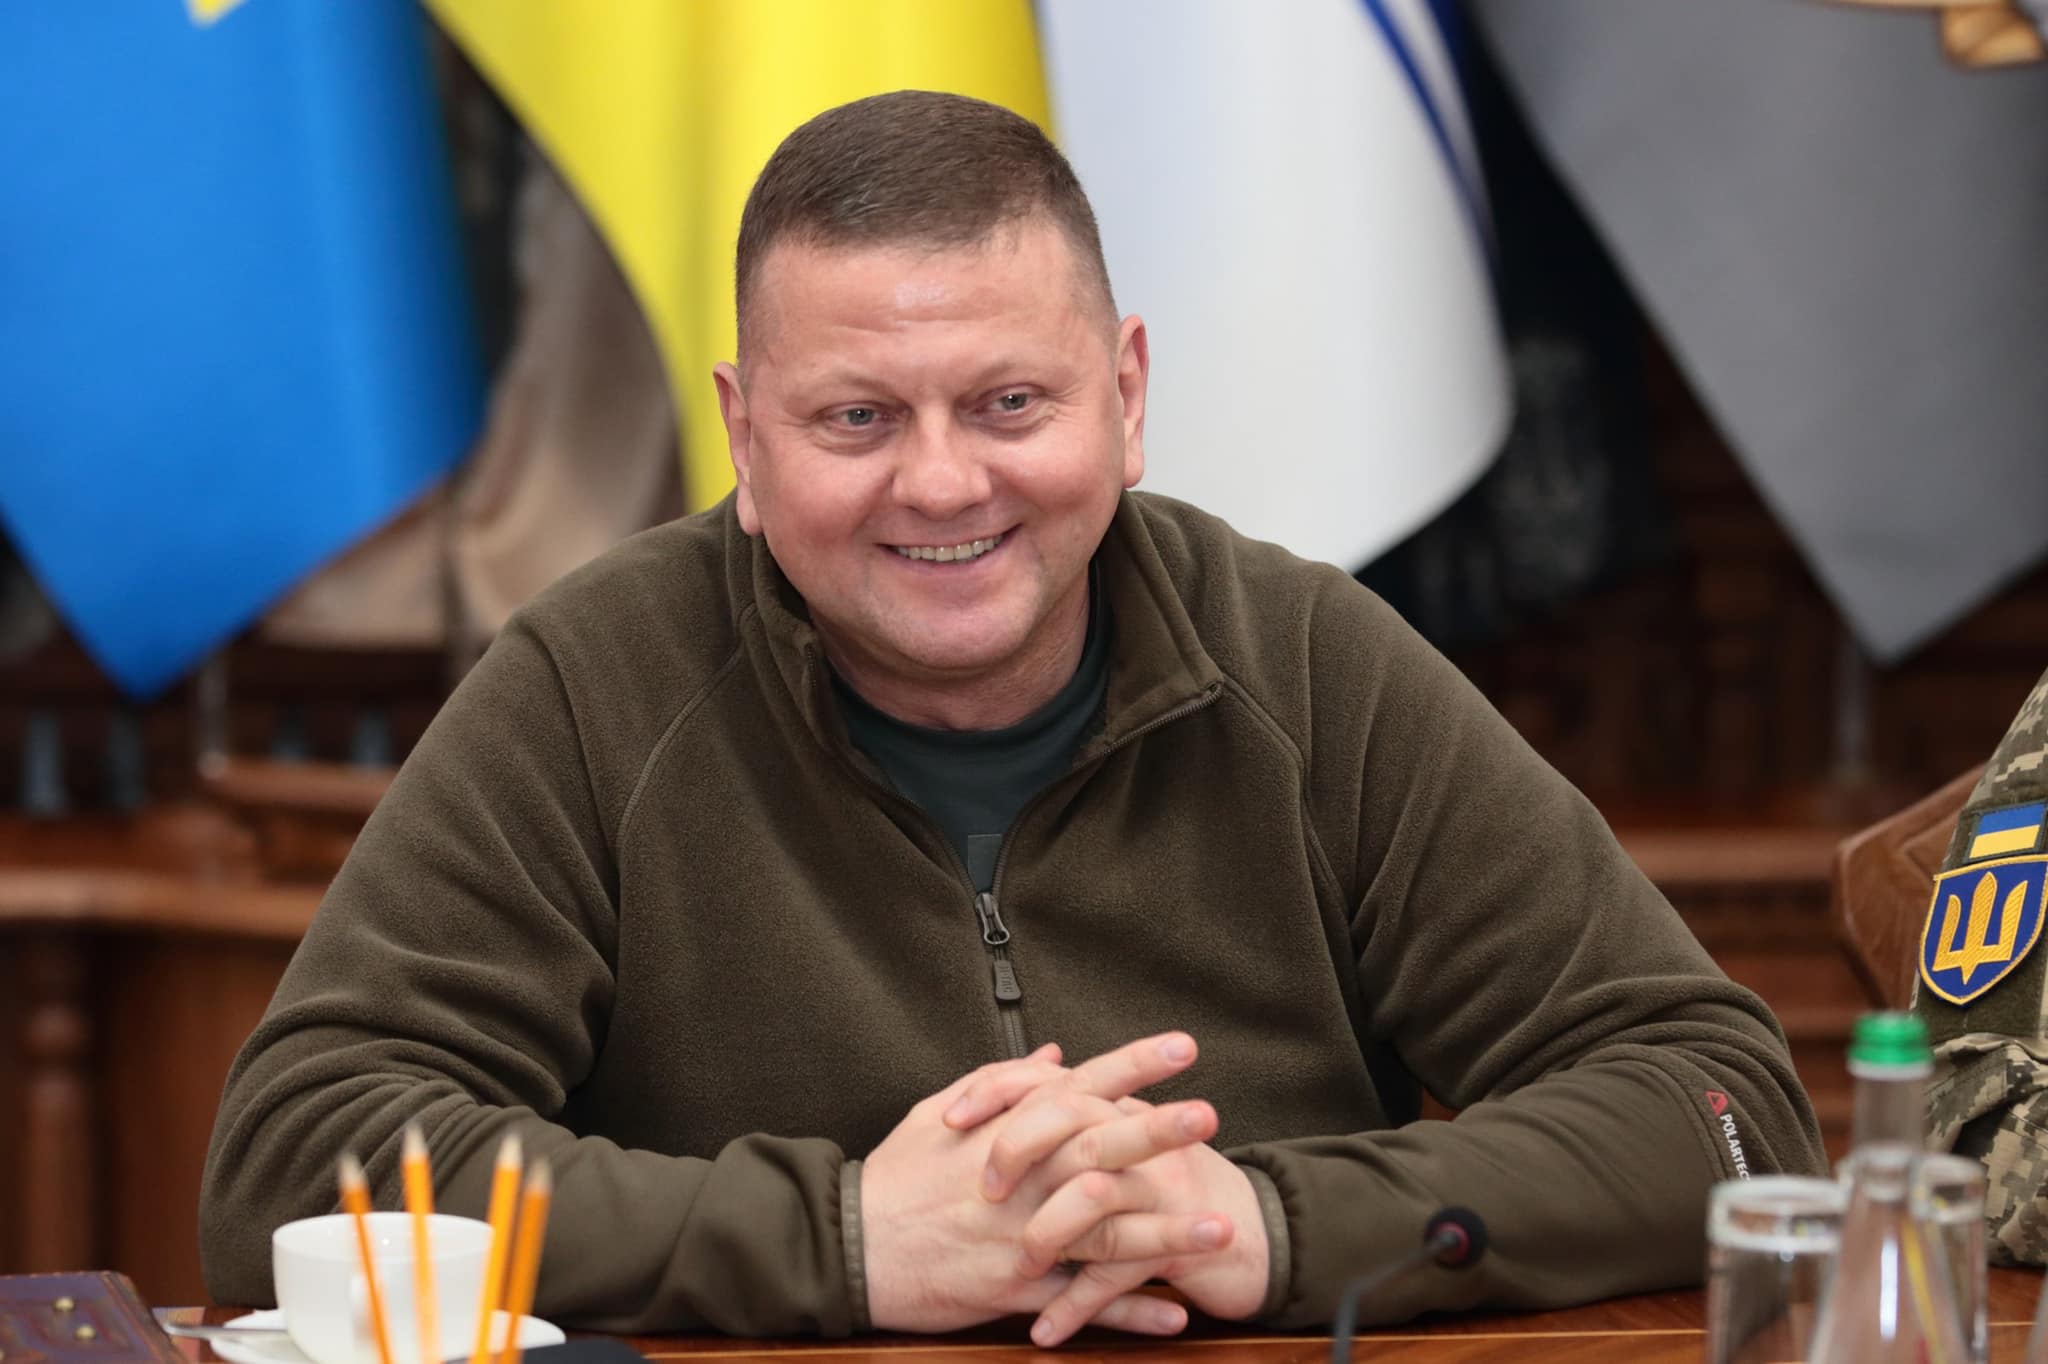 Valeriy Zaluzhny: The Ukrainian military will not accept any agreements or compromise solutions